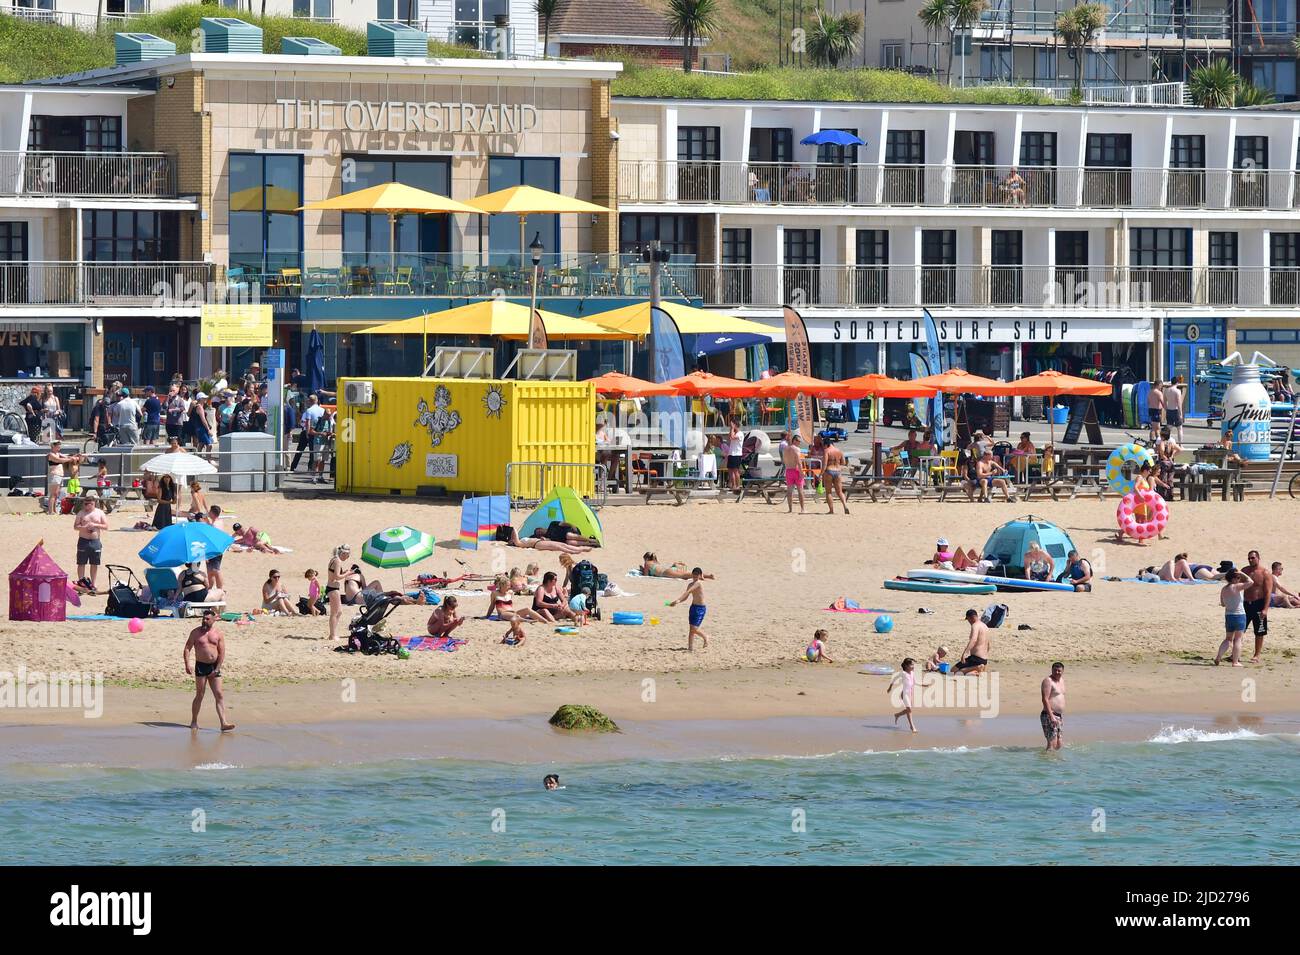 Boscombe, Bournemouth, Dorset, UK, 17th June 2022, Weather. Set to be the hottest day of the year so far as the short heatwave peaks. People head to the beach for the sunshine and some fresher sea air in front of The Overstrand restaurant and surf shop. Credit: Paul Biggins/Alamy Live News Stock Photo